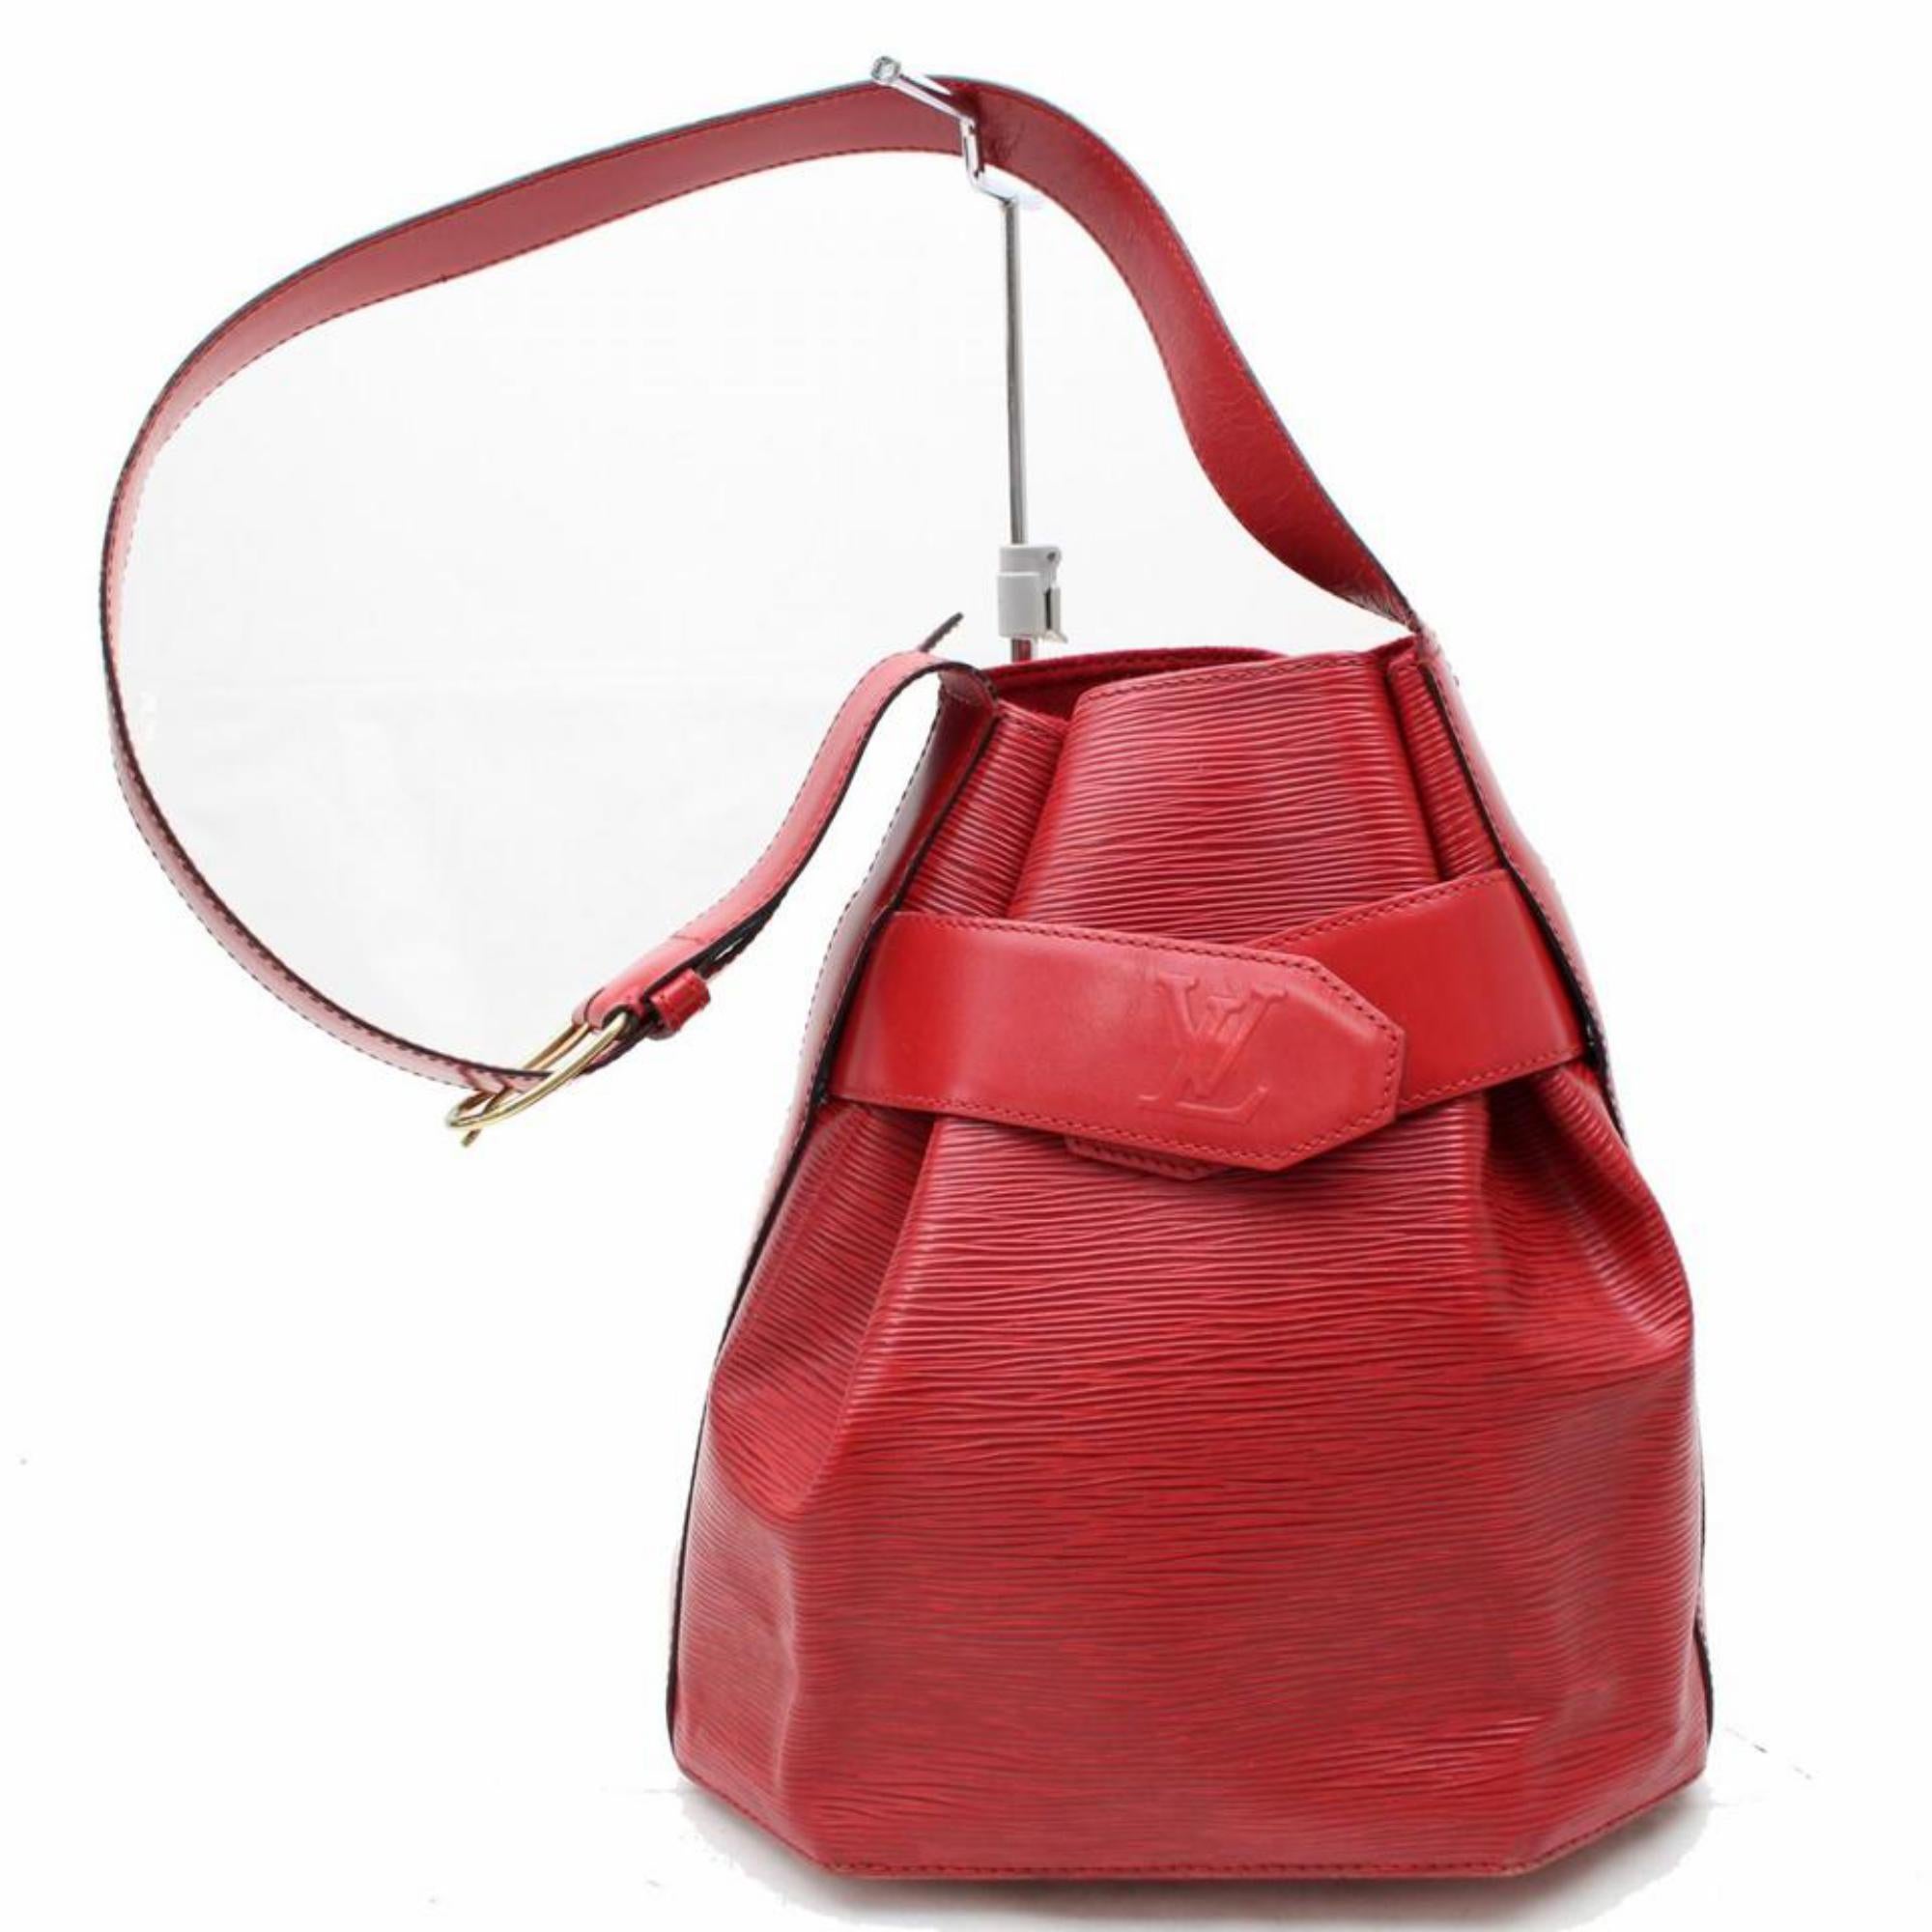 Louis Vuitton Sac D'epaule Epi 866272 Red Leather Shoulder Bag In Good Condition For Sale In Forest Hills, NY